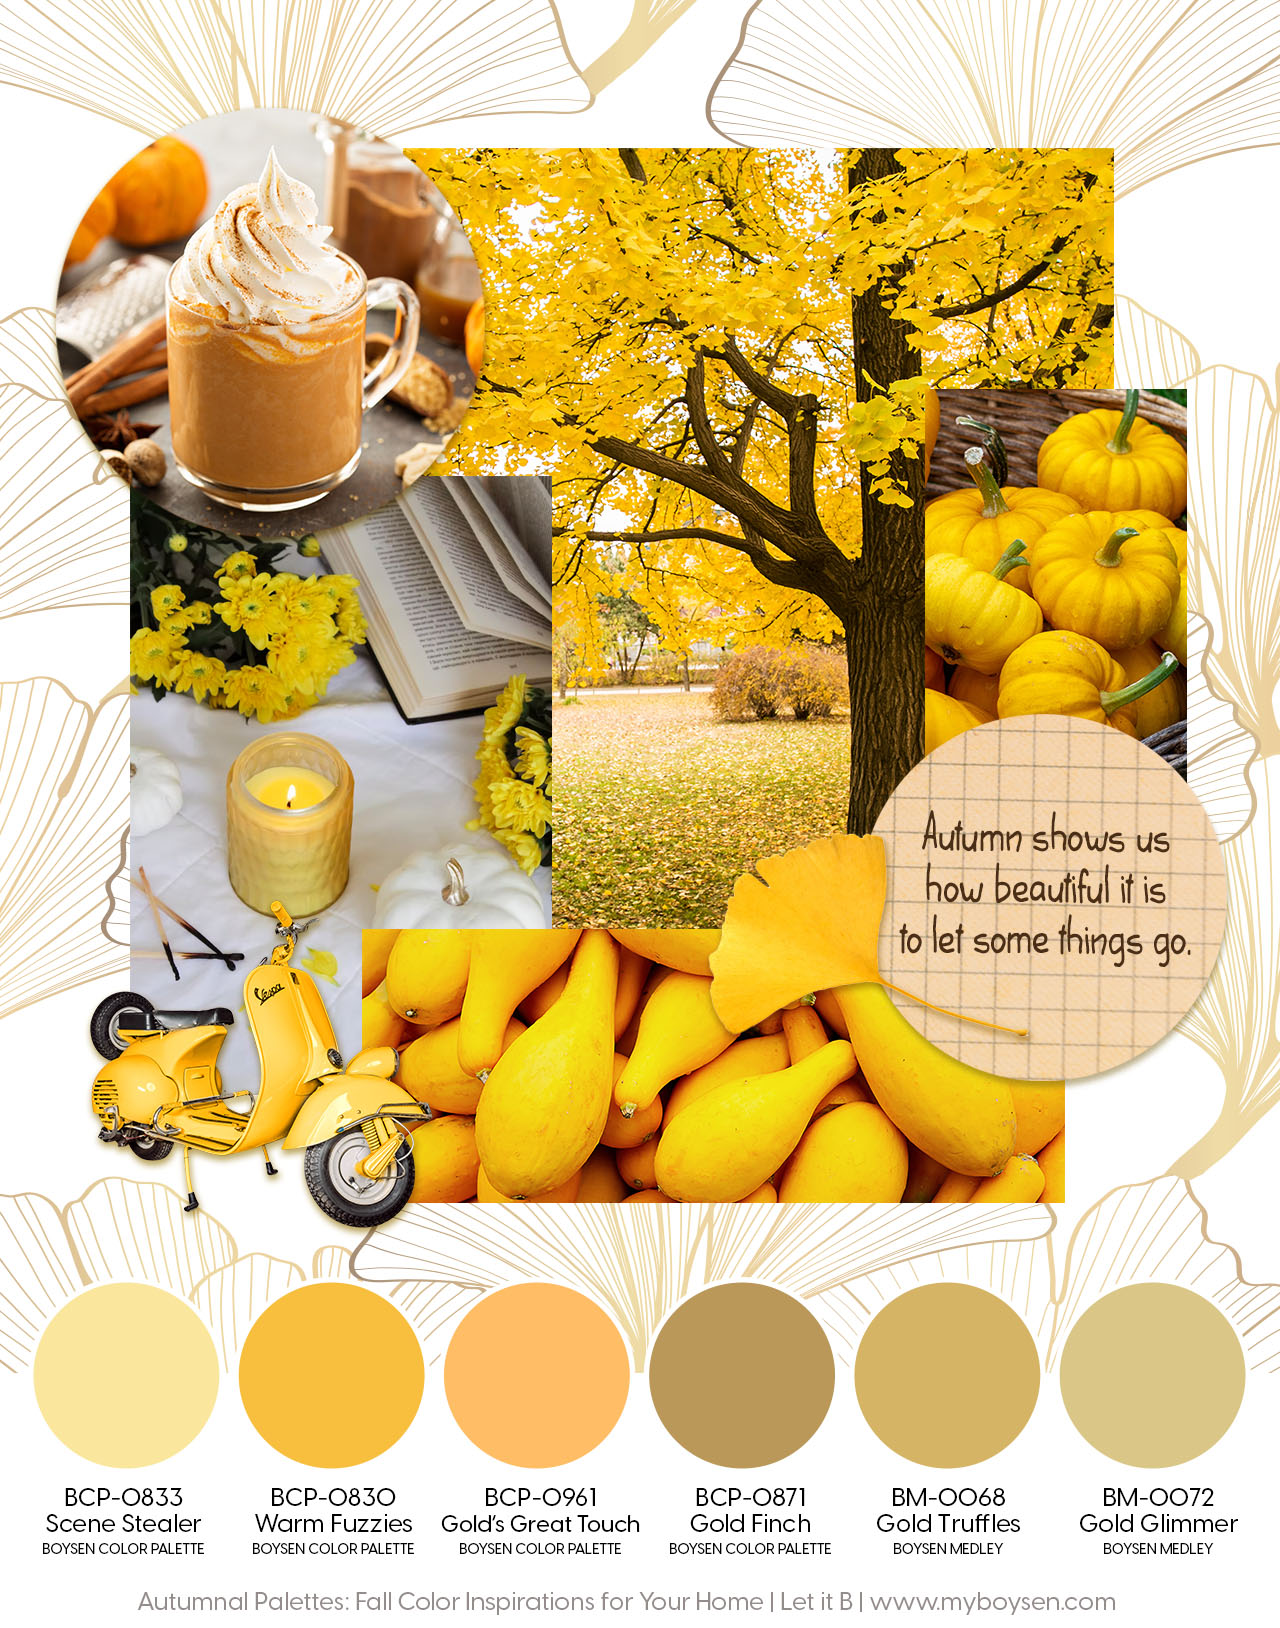 Autumnal Palettes: Fall Color Inspirations for Your Home | MyBoysen